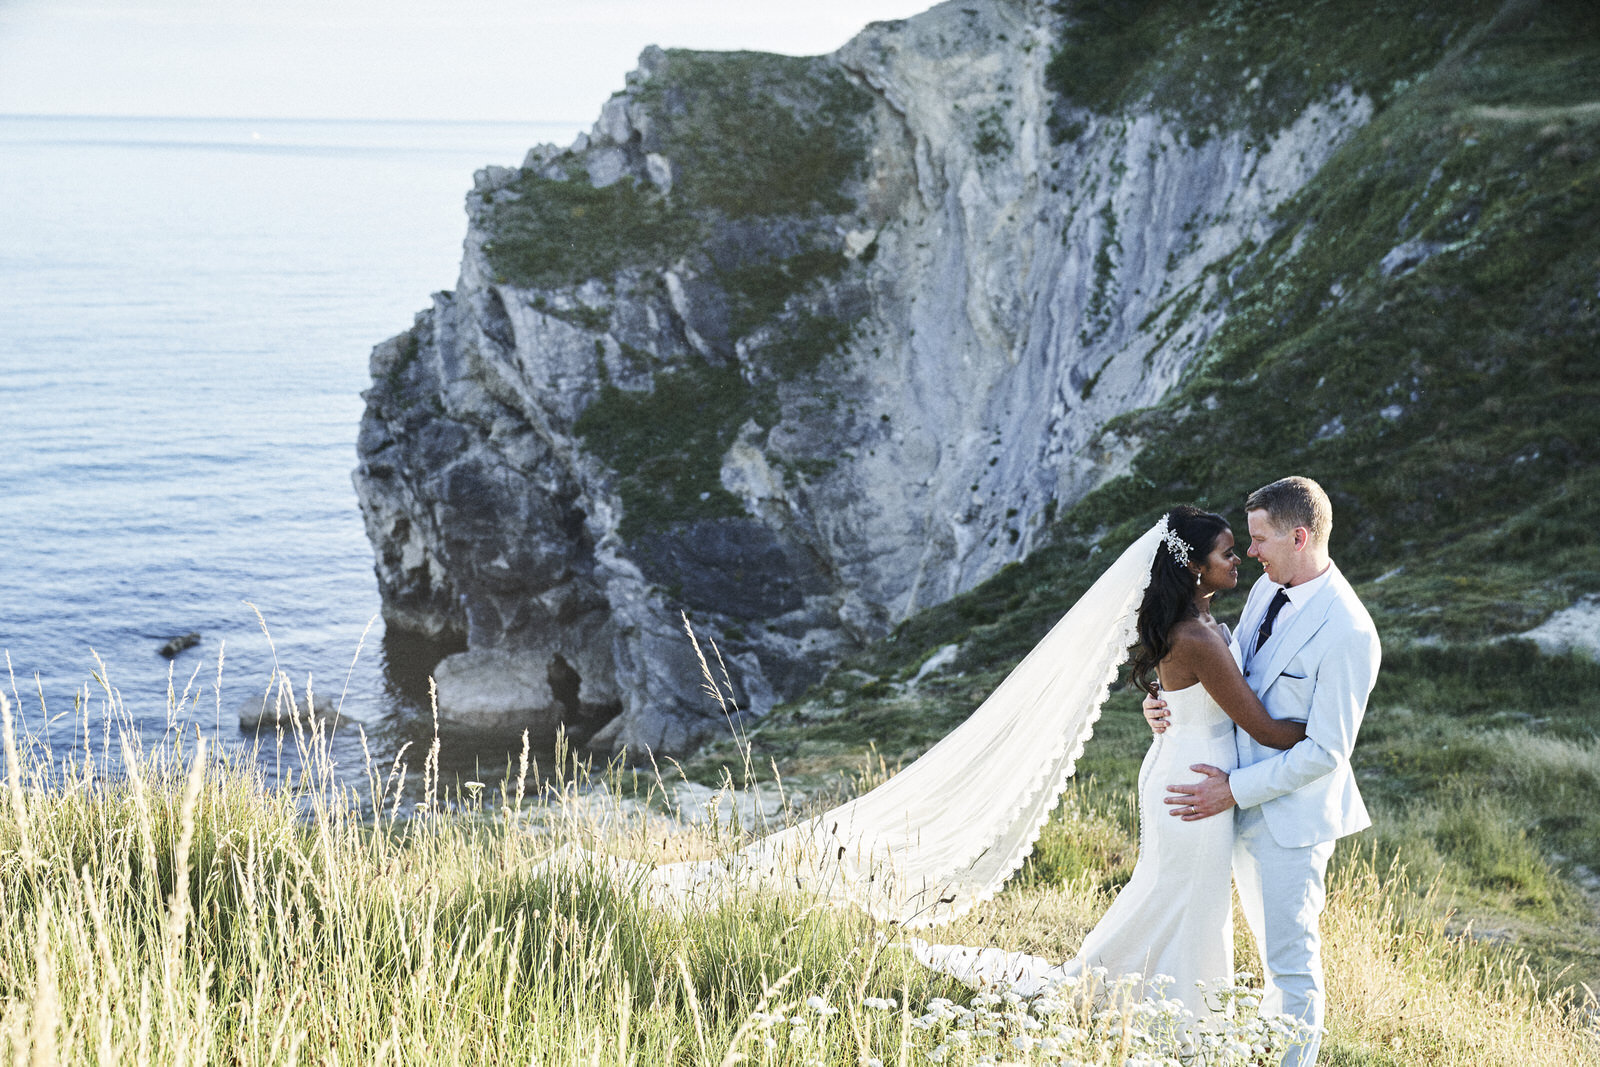 Bride and groom posing for portraits on grassy cliffside